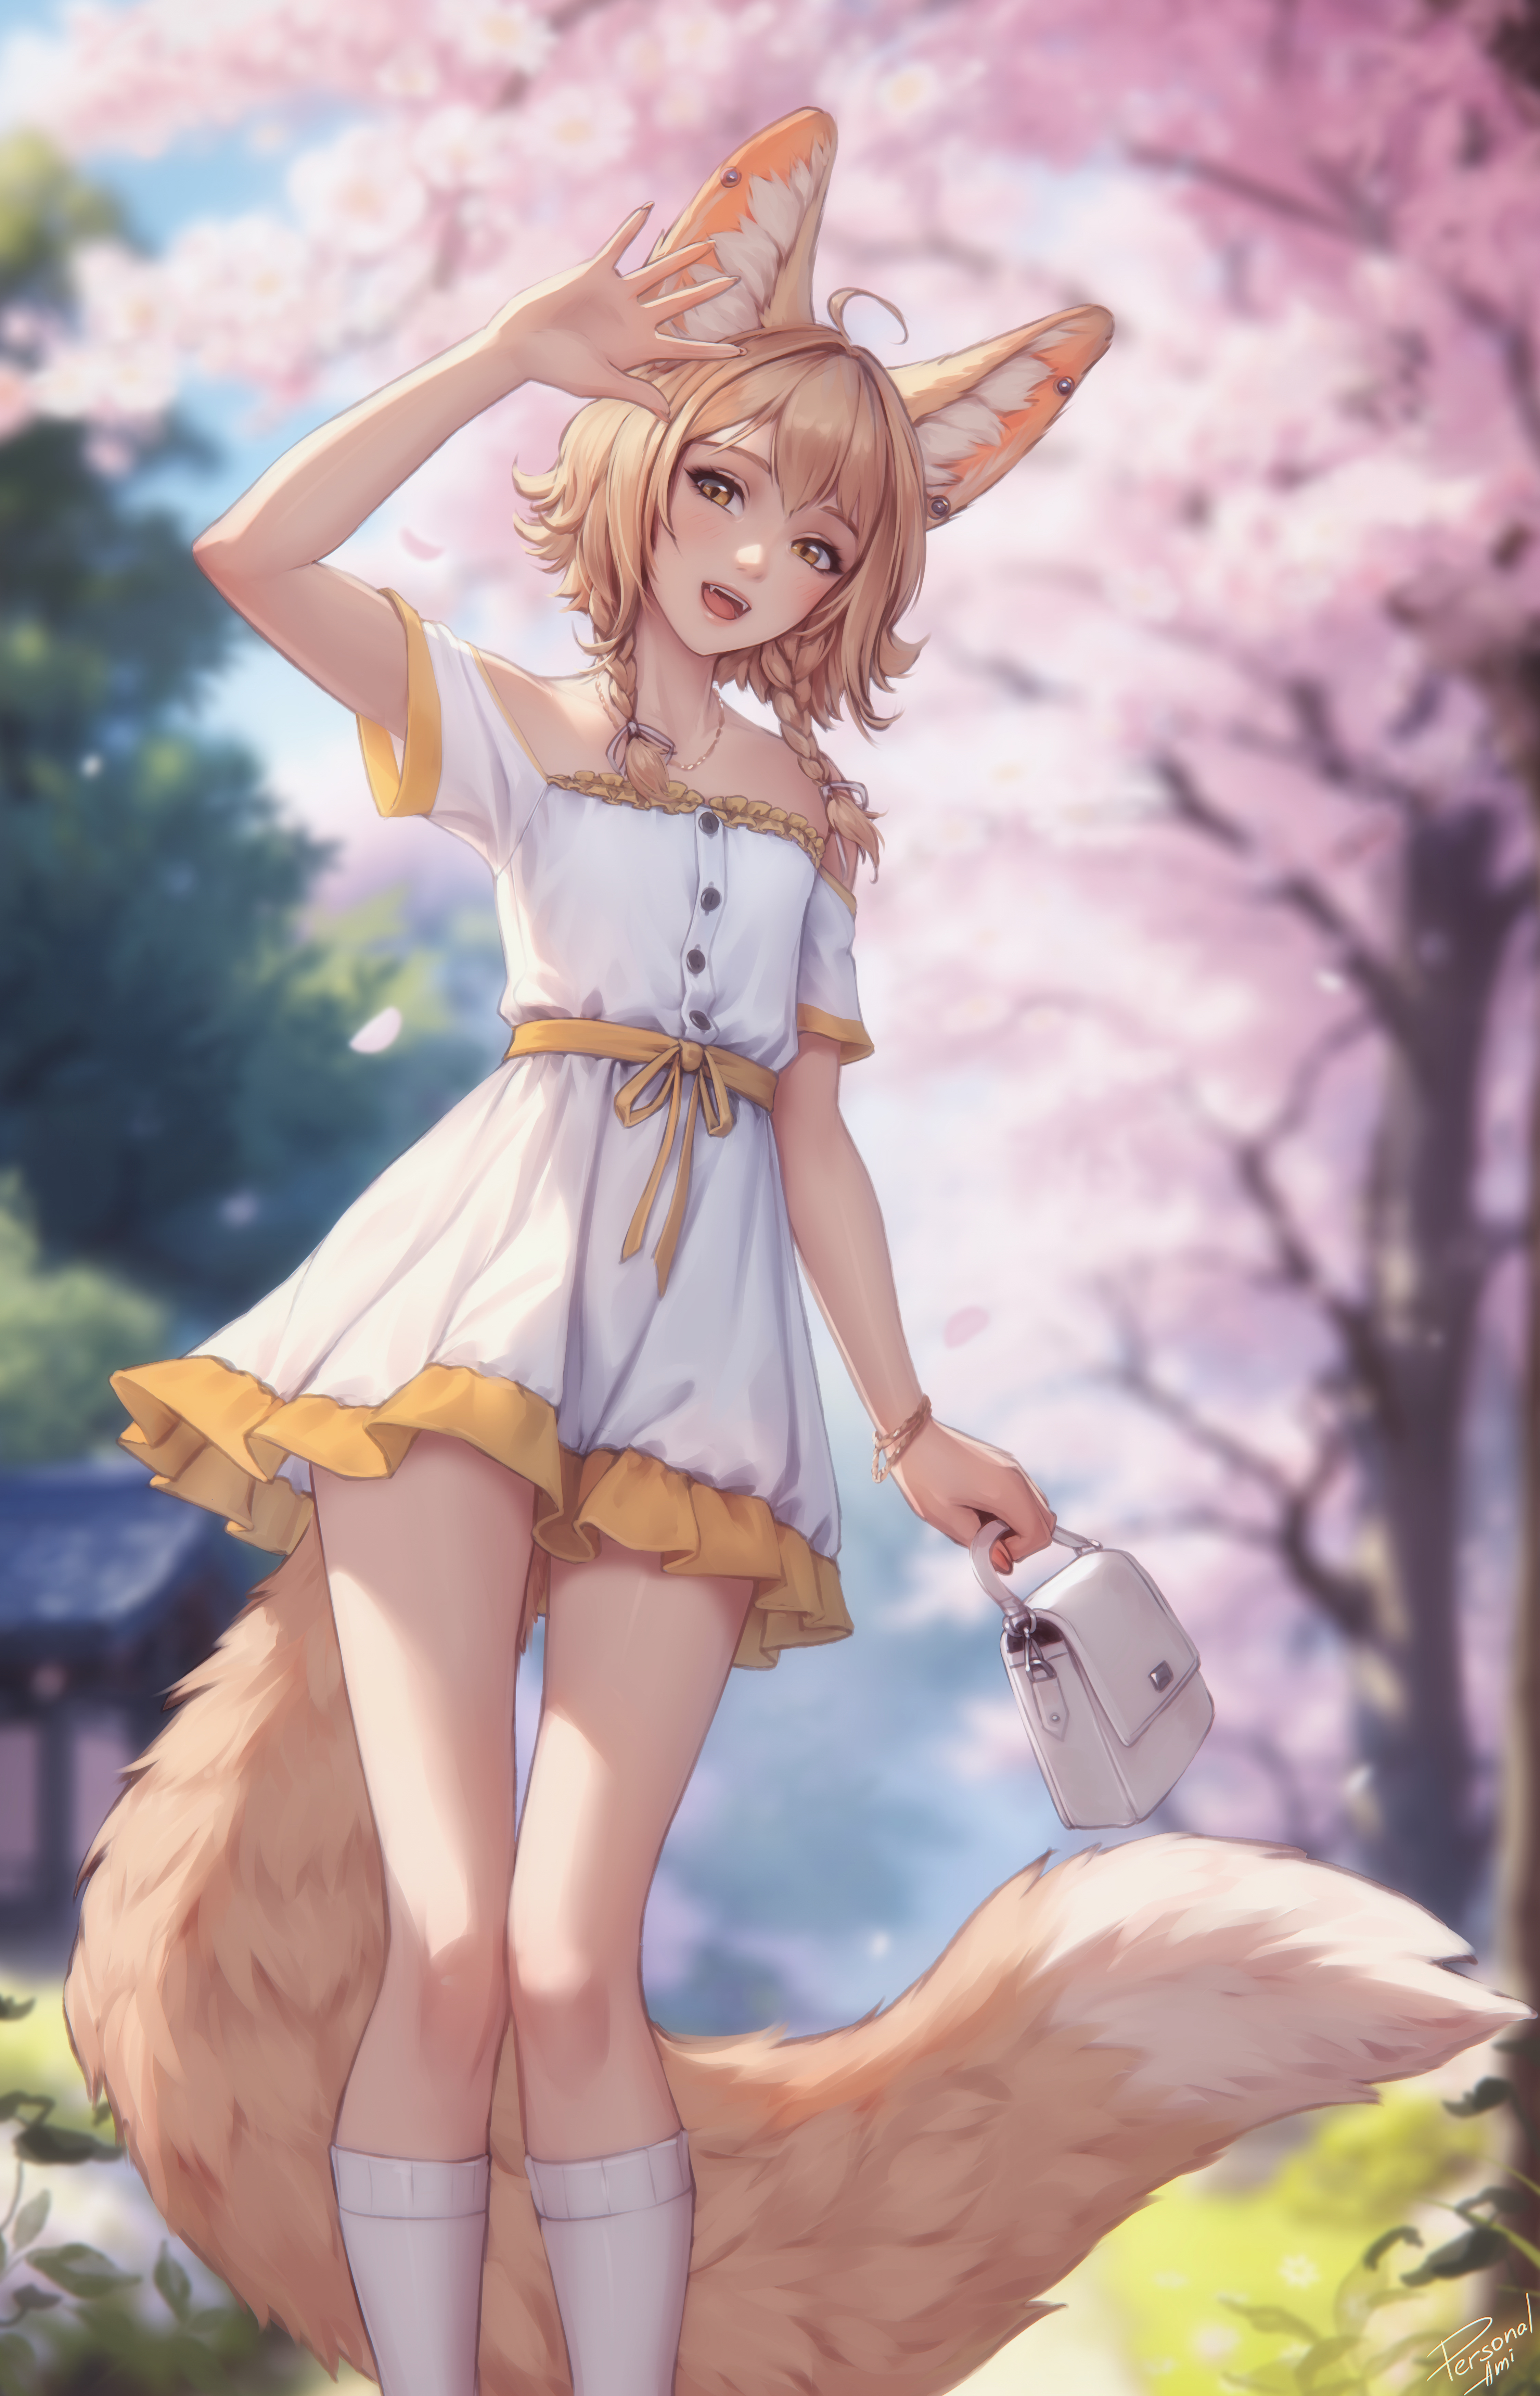 Anime 4500x7000 Khiara (OC) anime anime girls fantasy girl animal ears tail portrait display artwork drawing Personal ami purse original characters standing looking at viewer signature fox ears fox tail twintails cherry blossom petals dress frills sunlight open mouth digital art outdoors women outdoors bracelets one arm up trees braids blonde smiling socks white socks knee high socks